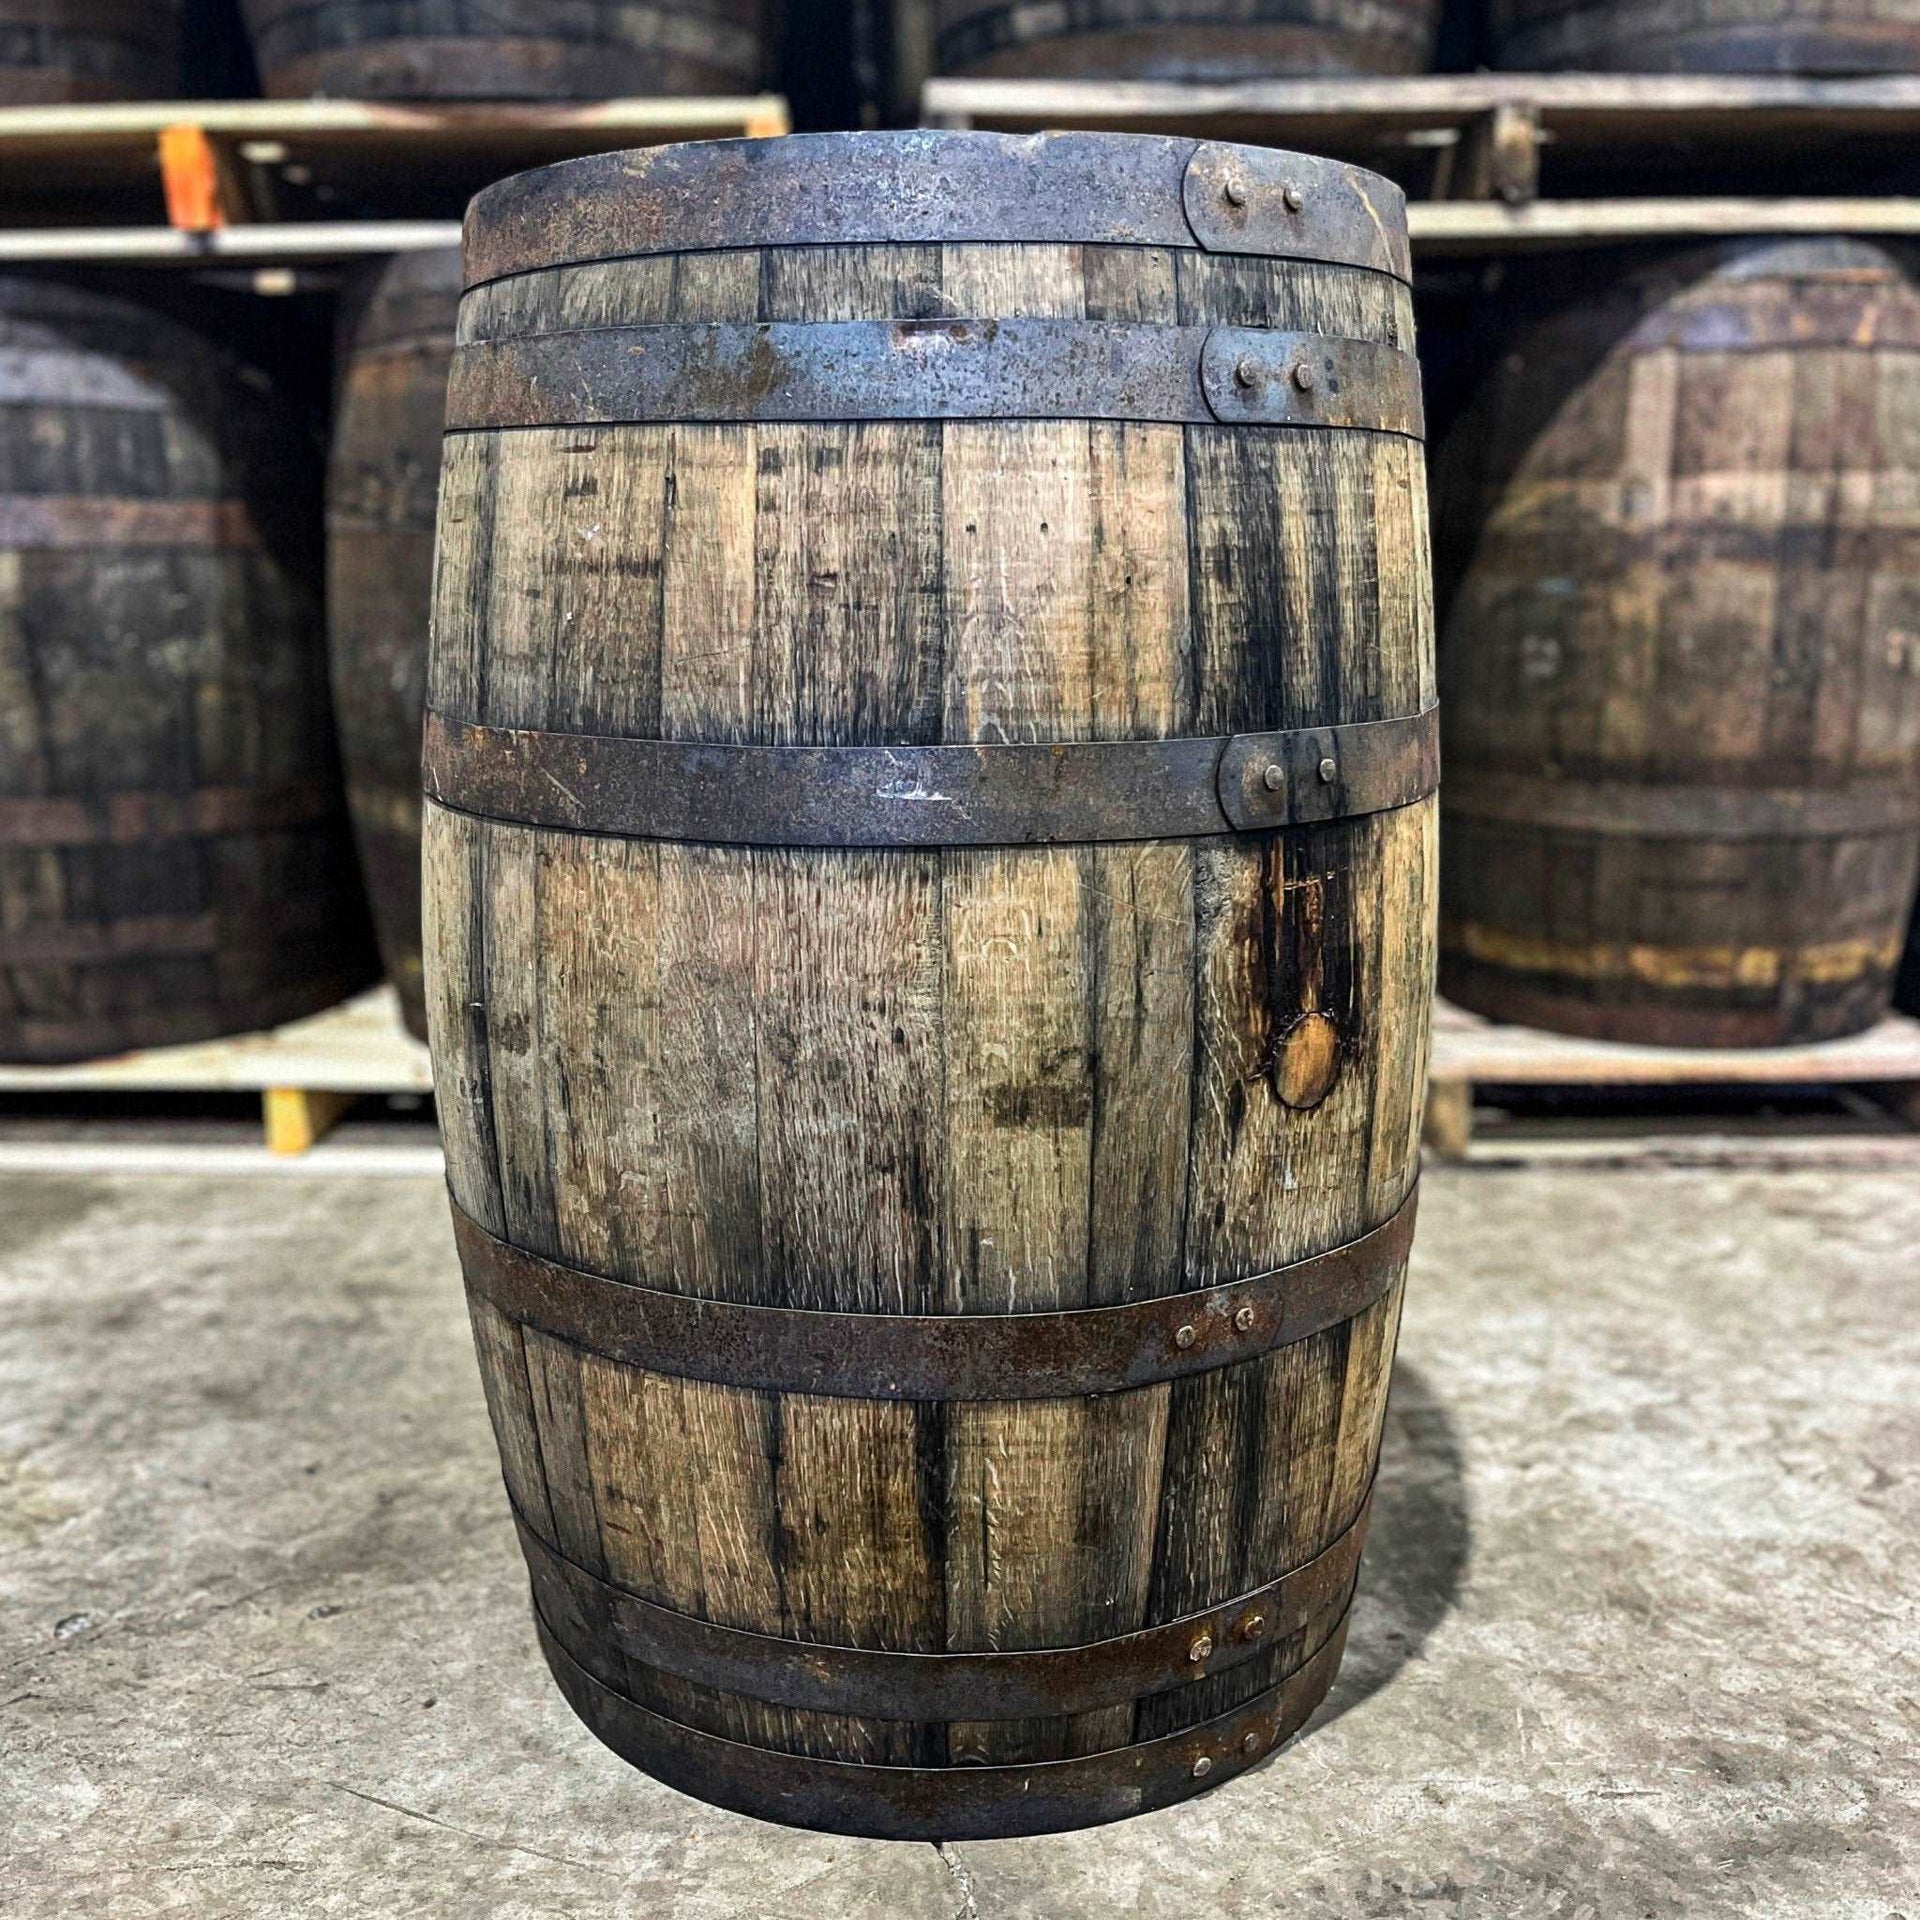 Canadian Whisky Barrel - Furniture Grade – The County Cooperage